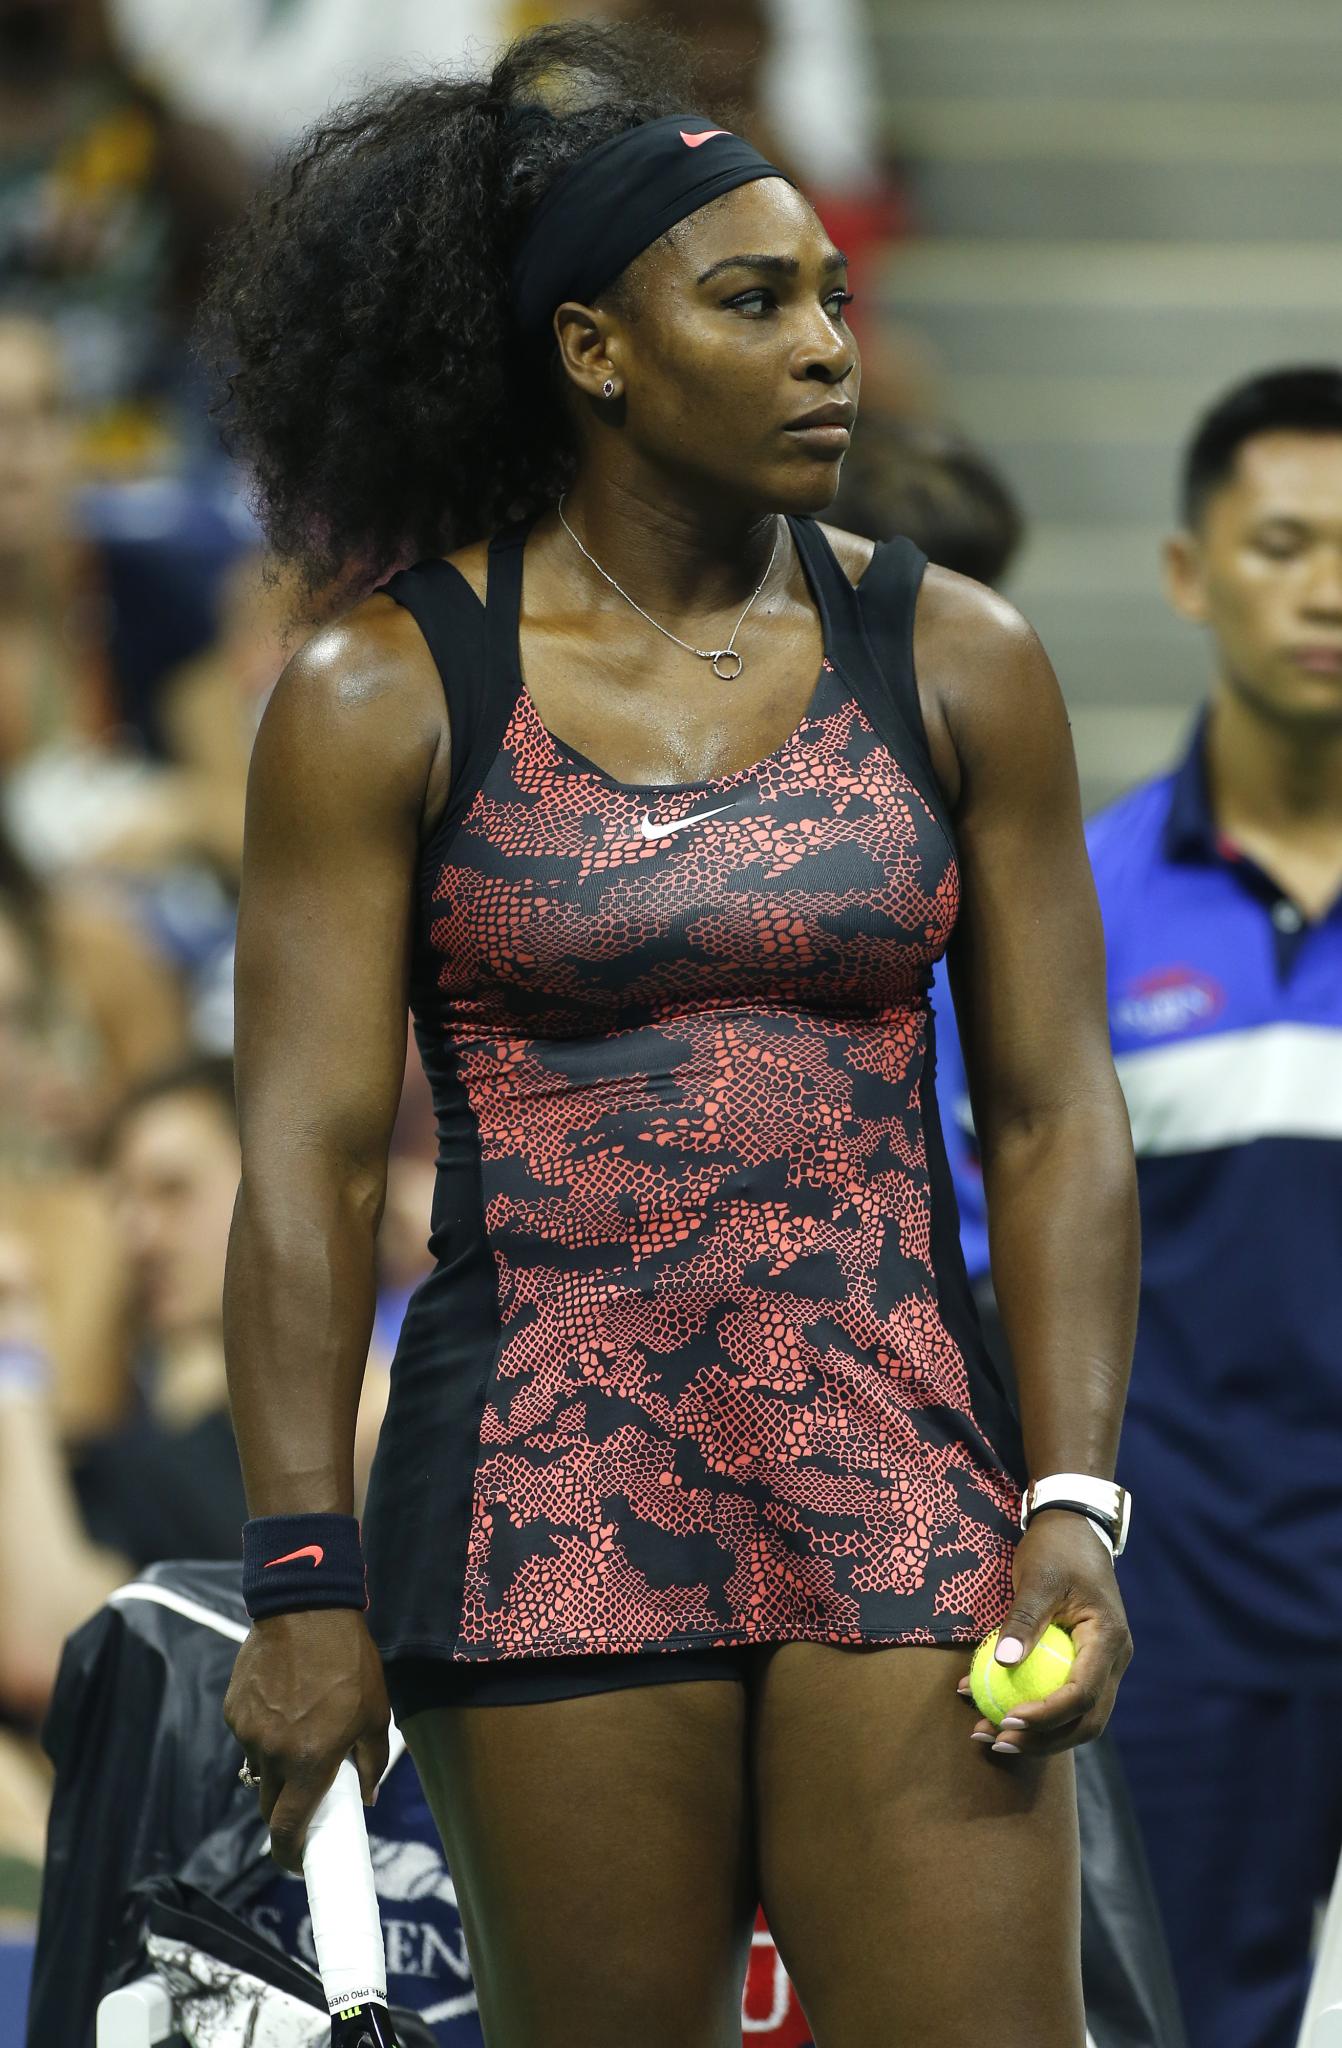 Life Lessons I Learned Watching Serena at the U.S. Open